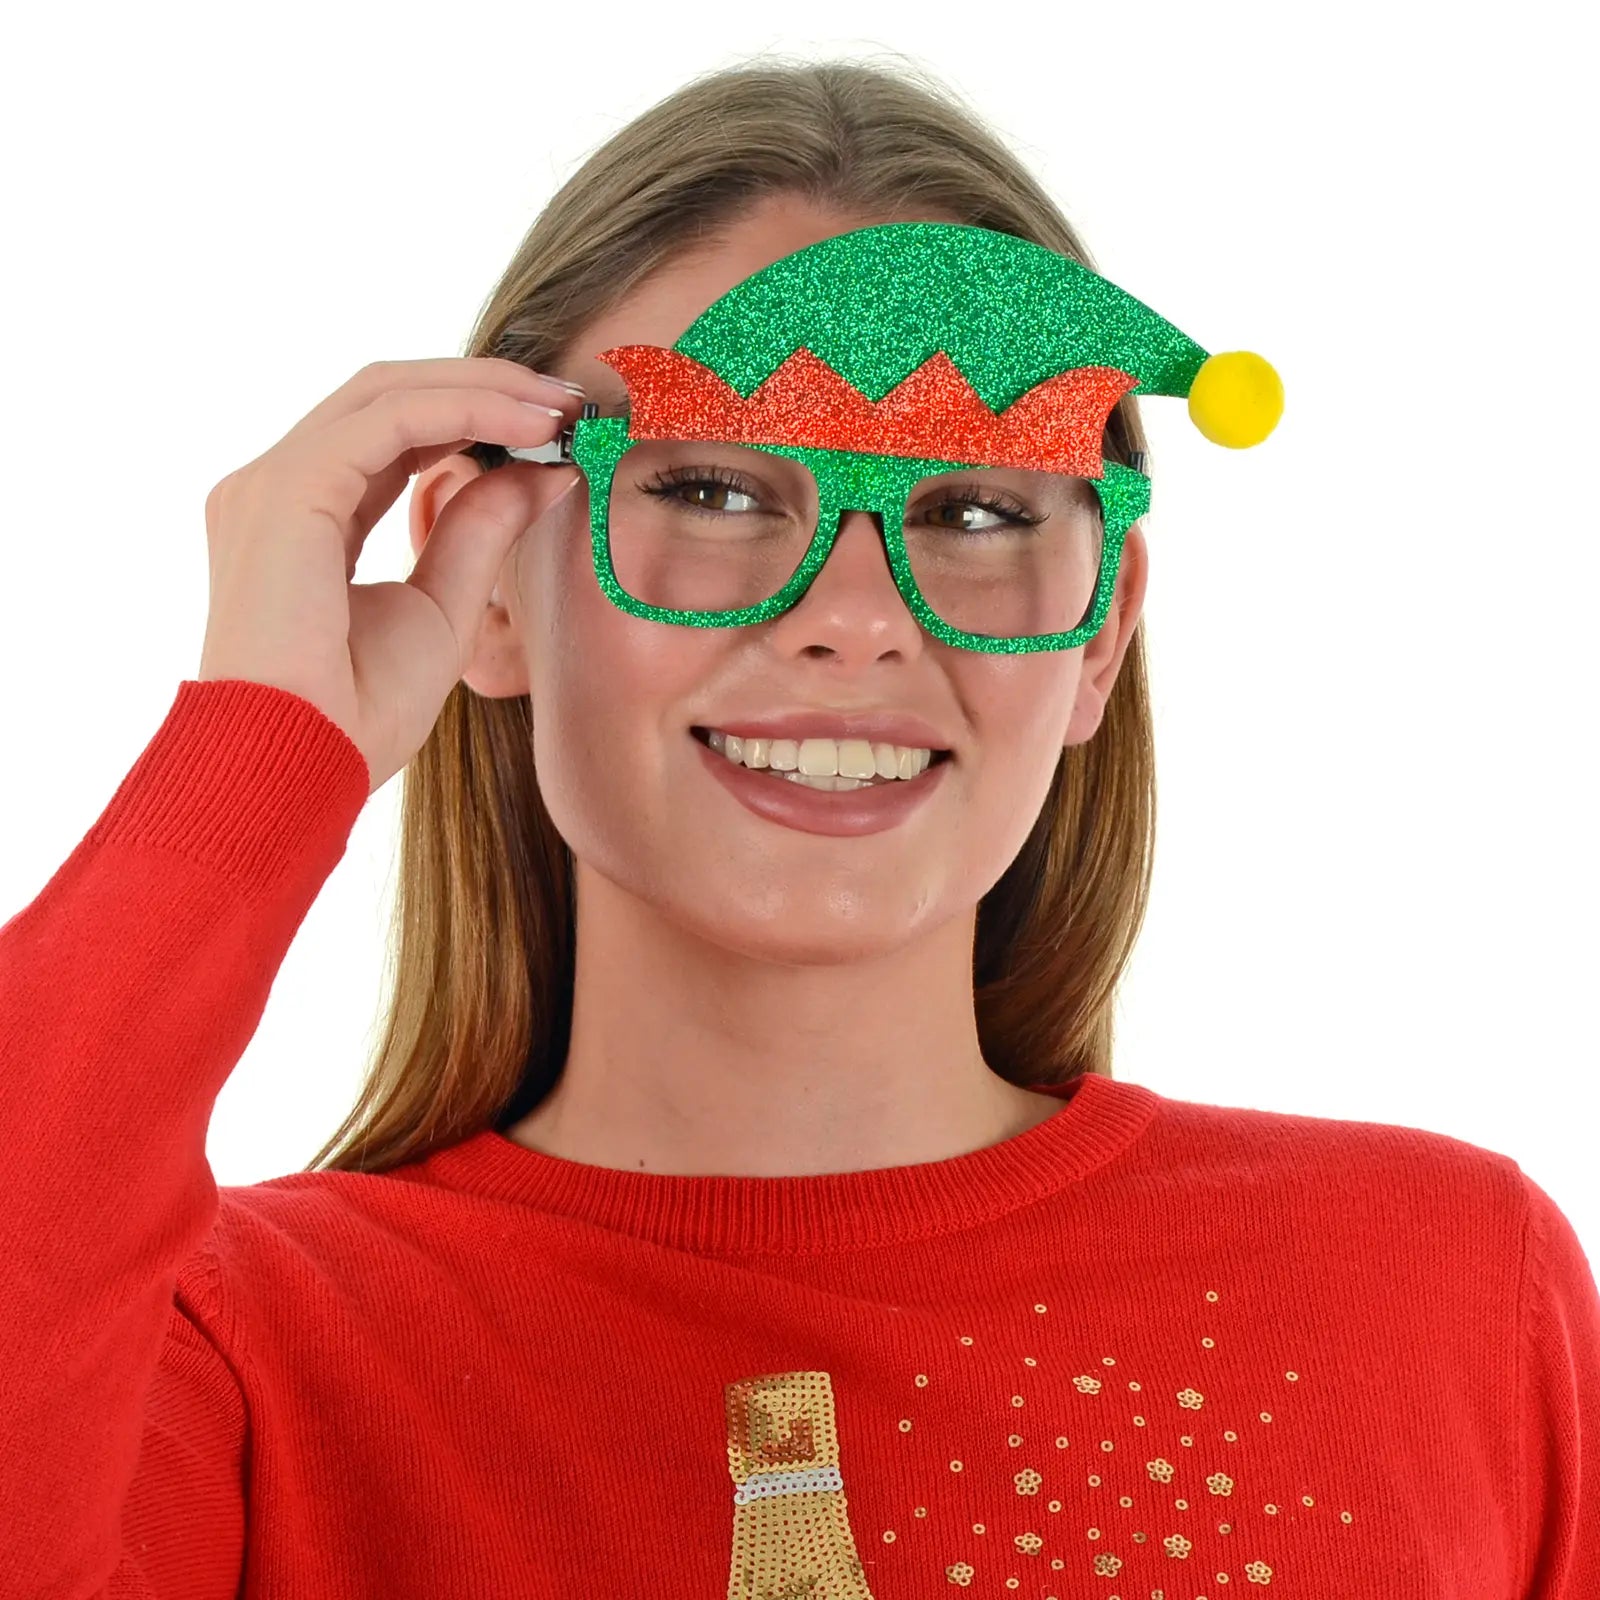 model wears green and red glitter glasses in the shape of an elf hat, finished with yellow pom pom